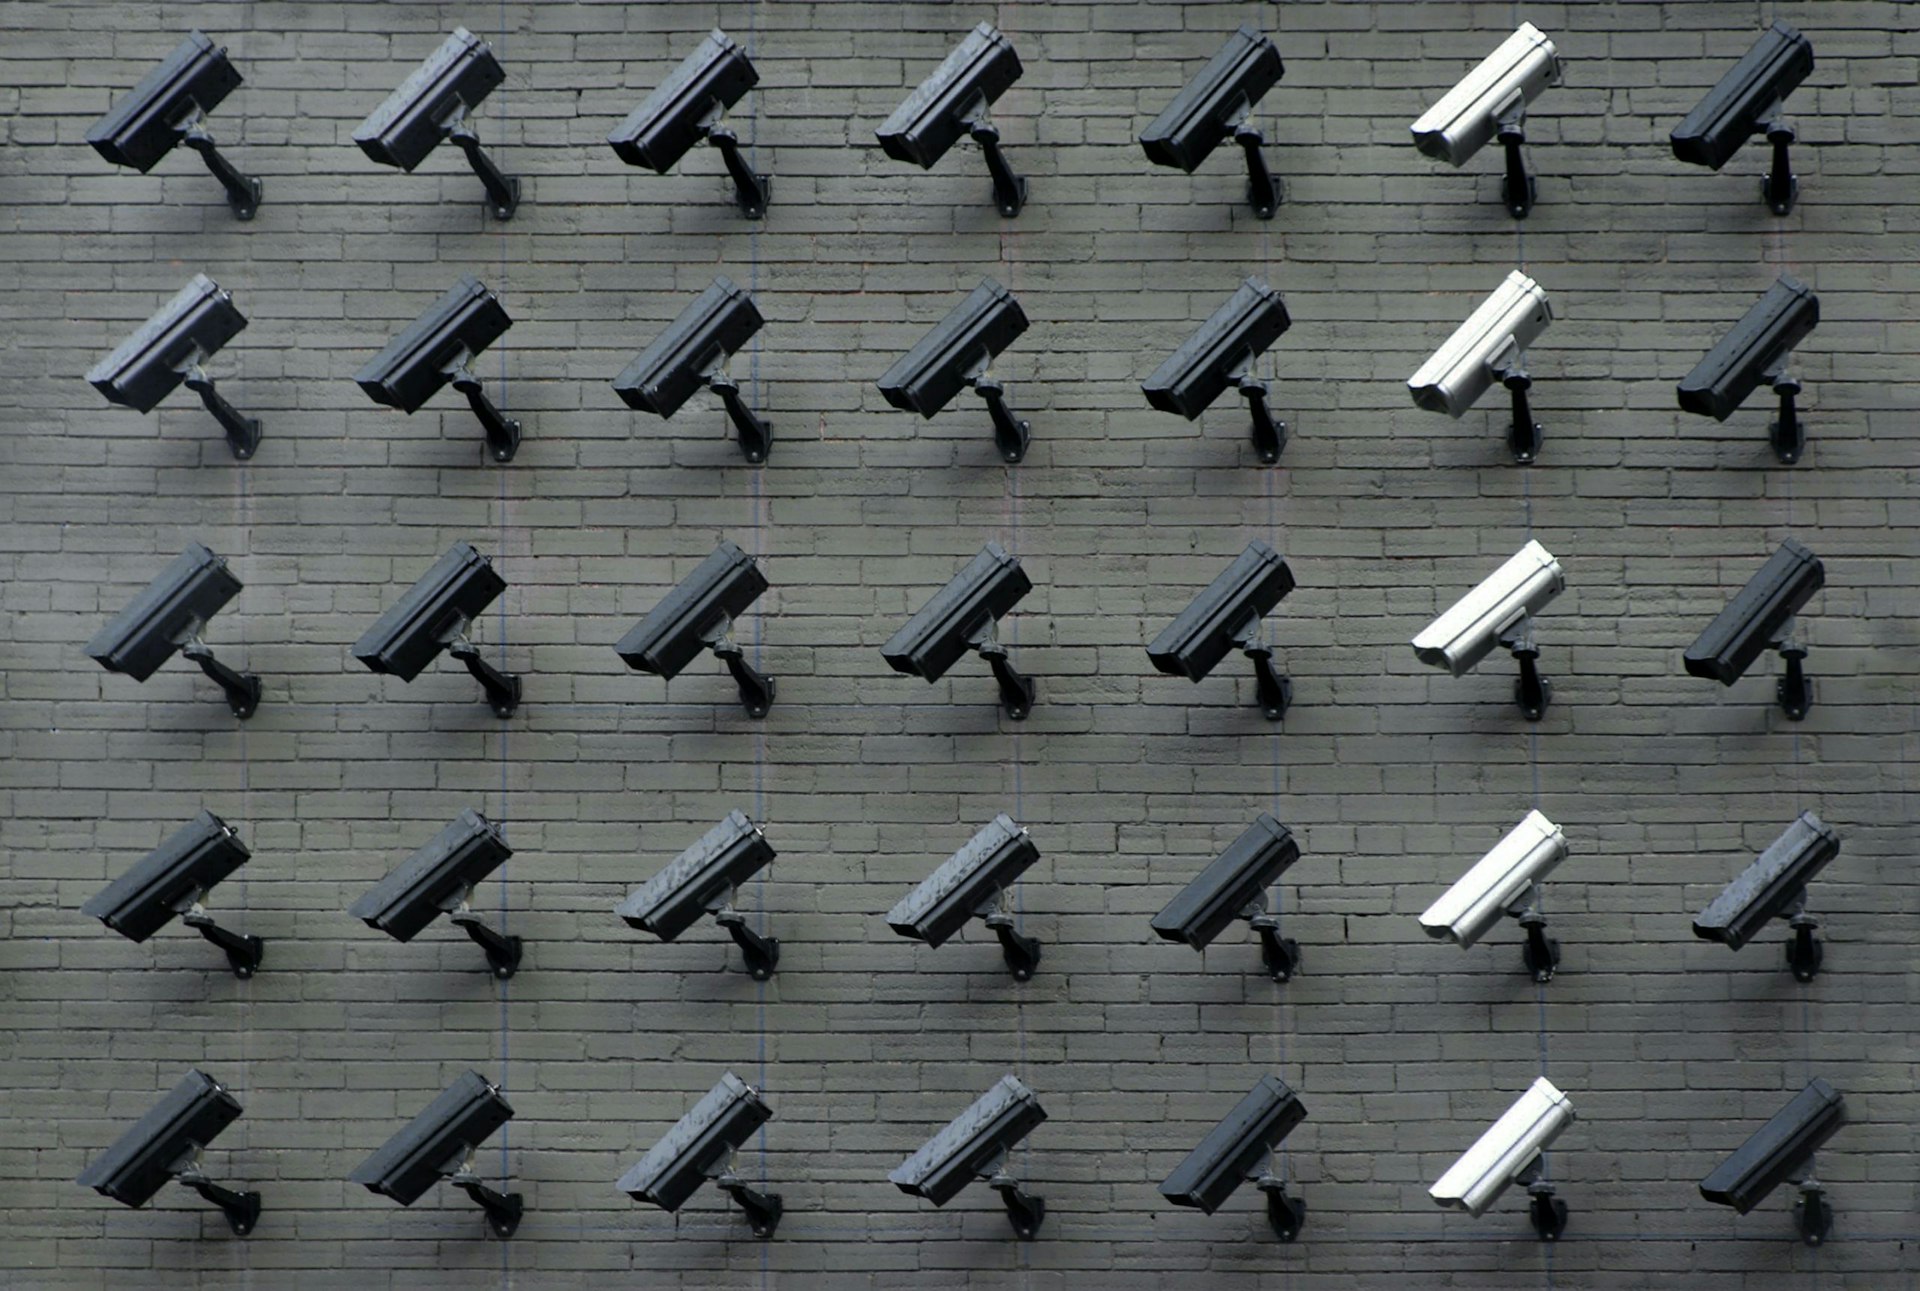 Tech workers are fighting back against employee surveillance